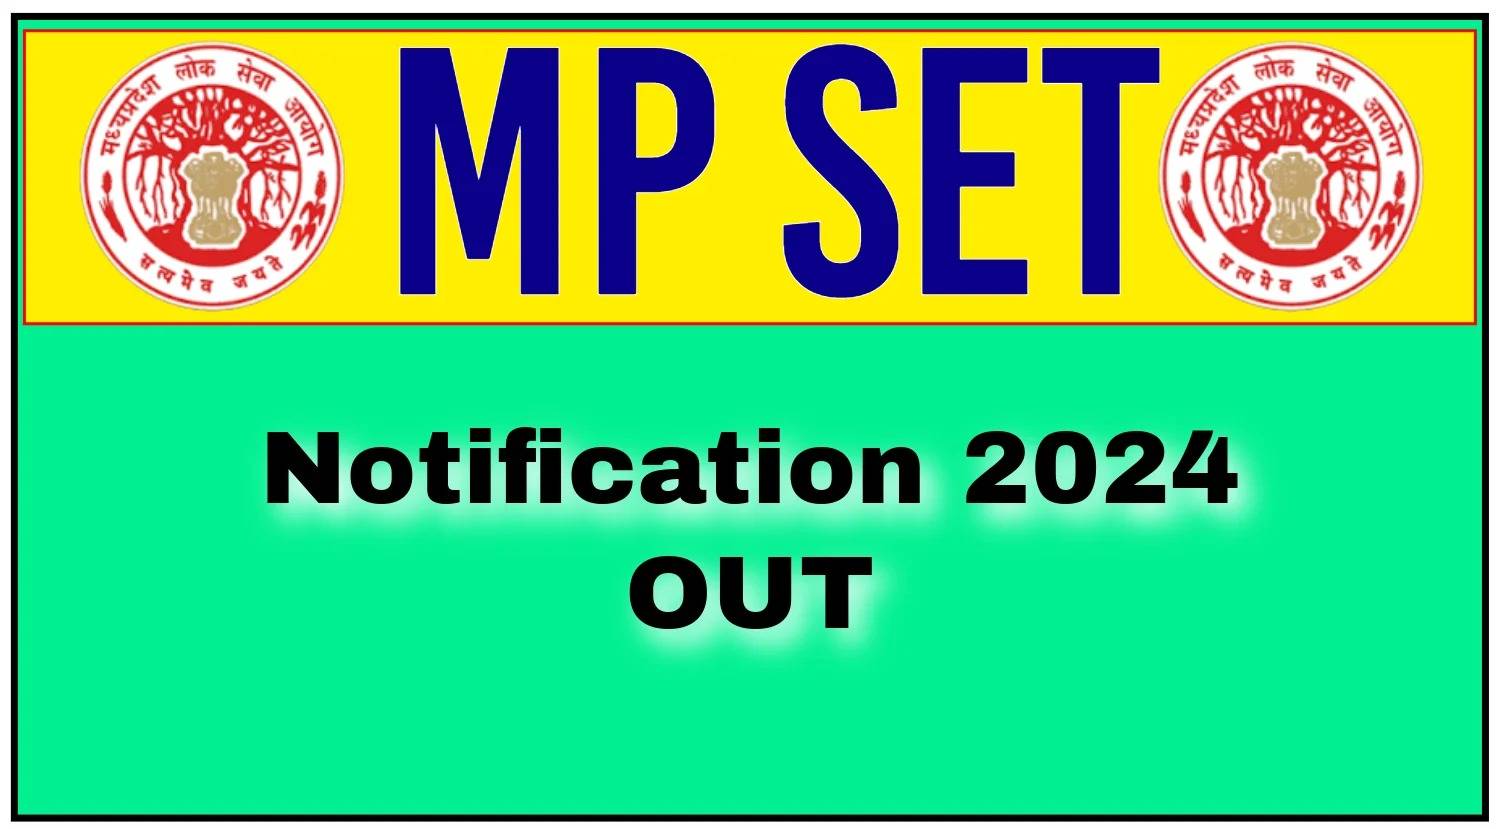 MPPSC SET 2024 Registration Opens Today: Step-by-Step Guide on How to Apply at mppsc.mp.gov.in